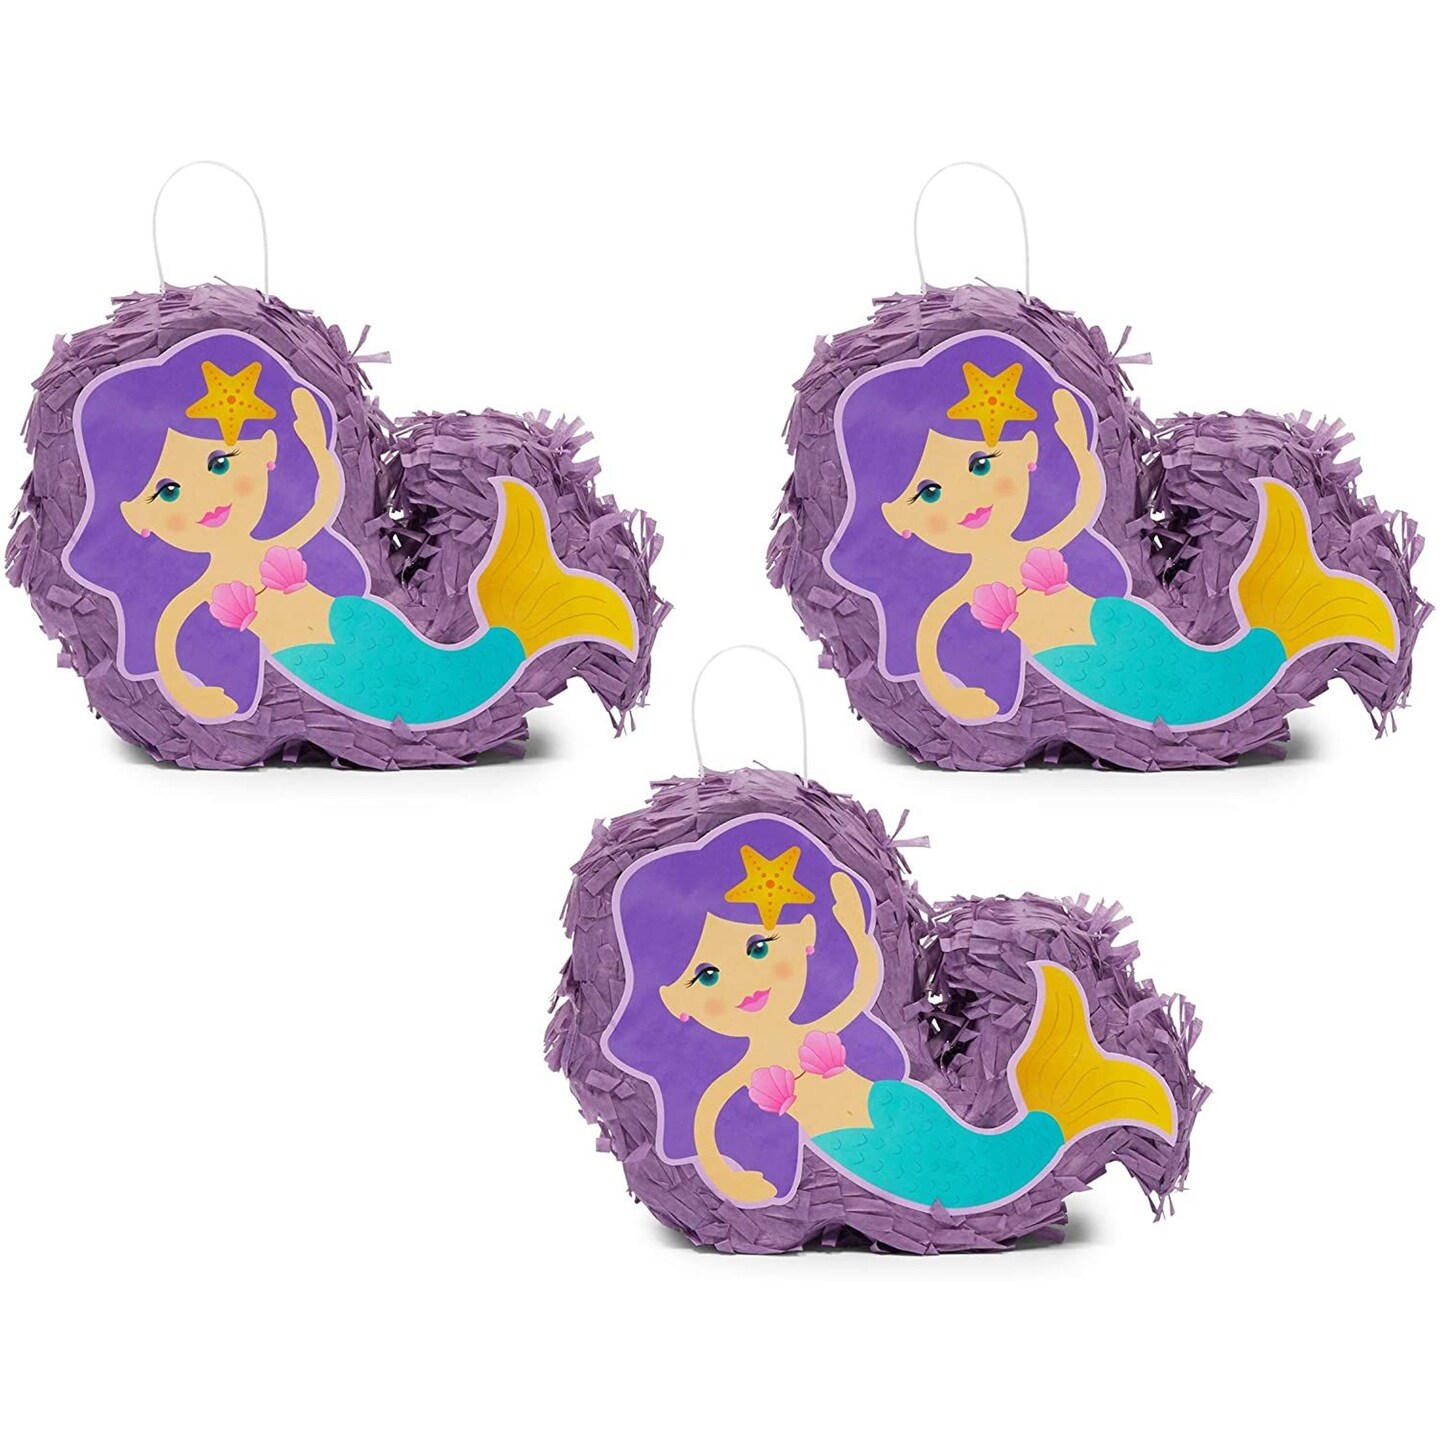 Mini Mermaid Pi&#xF1;atas for Girls Birthday Party Decorations (8 x 5 x 2.5 In, 3 Pack)